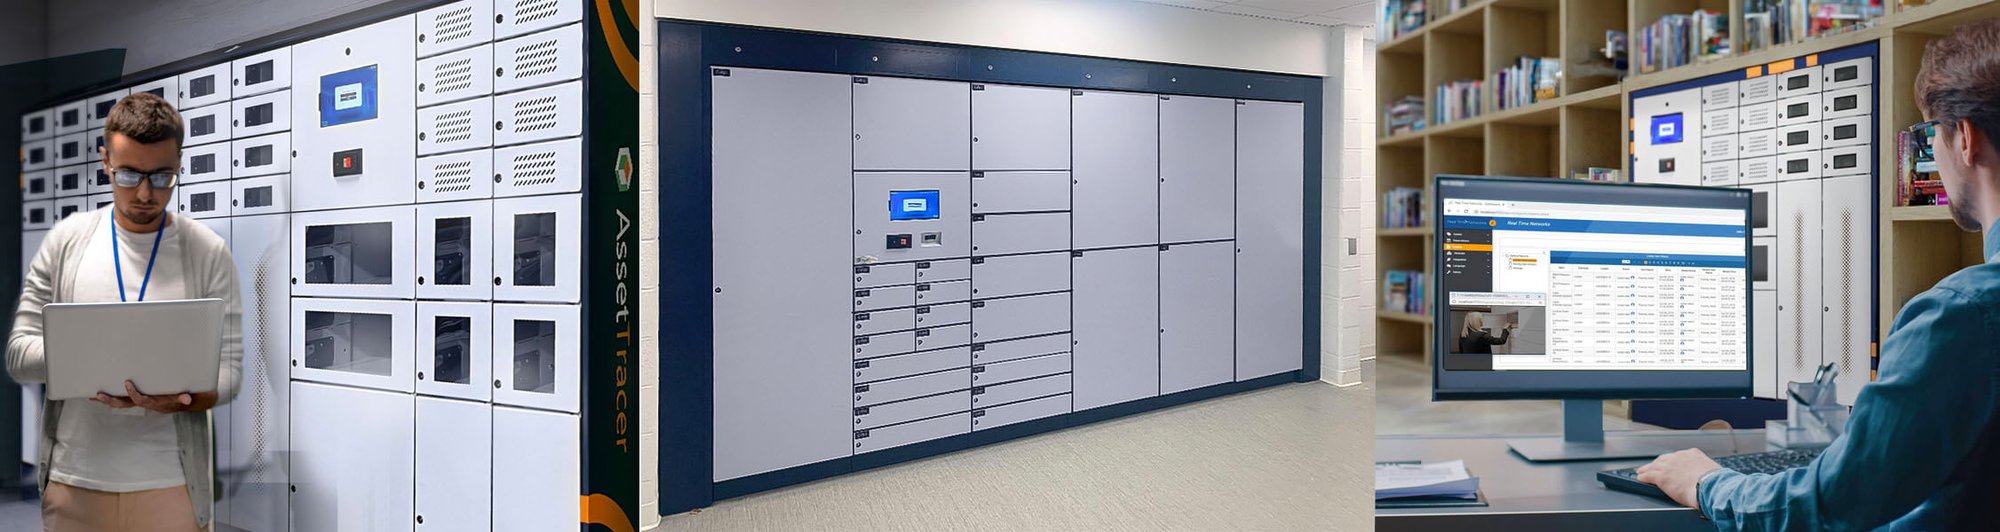 AssetTracer Smart Lockers are used in multiple locations and for multiple purposes